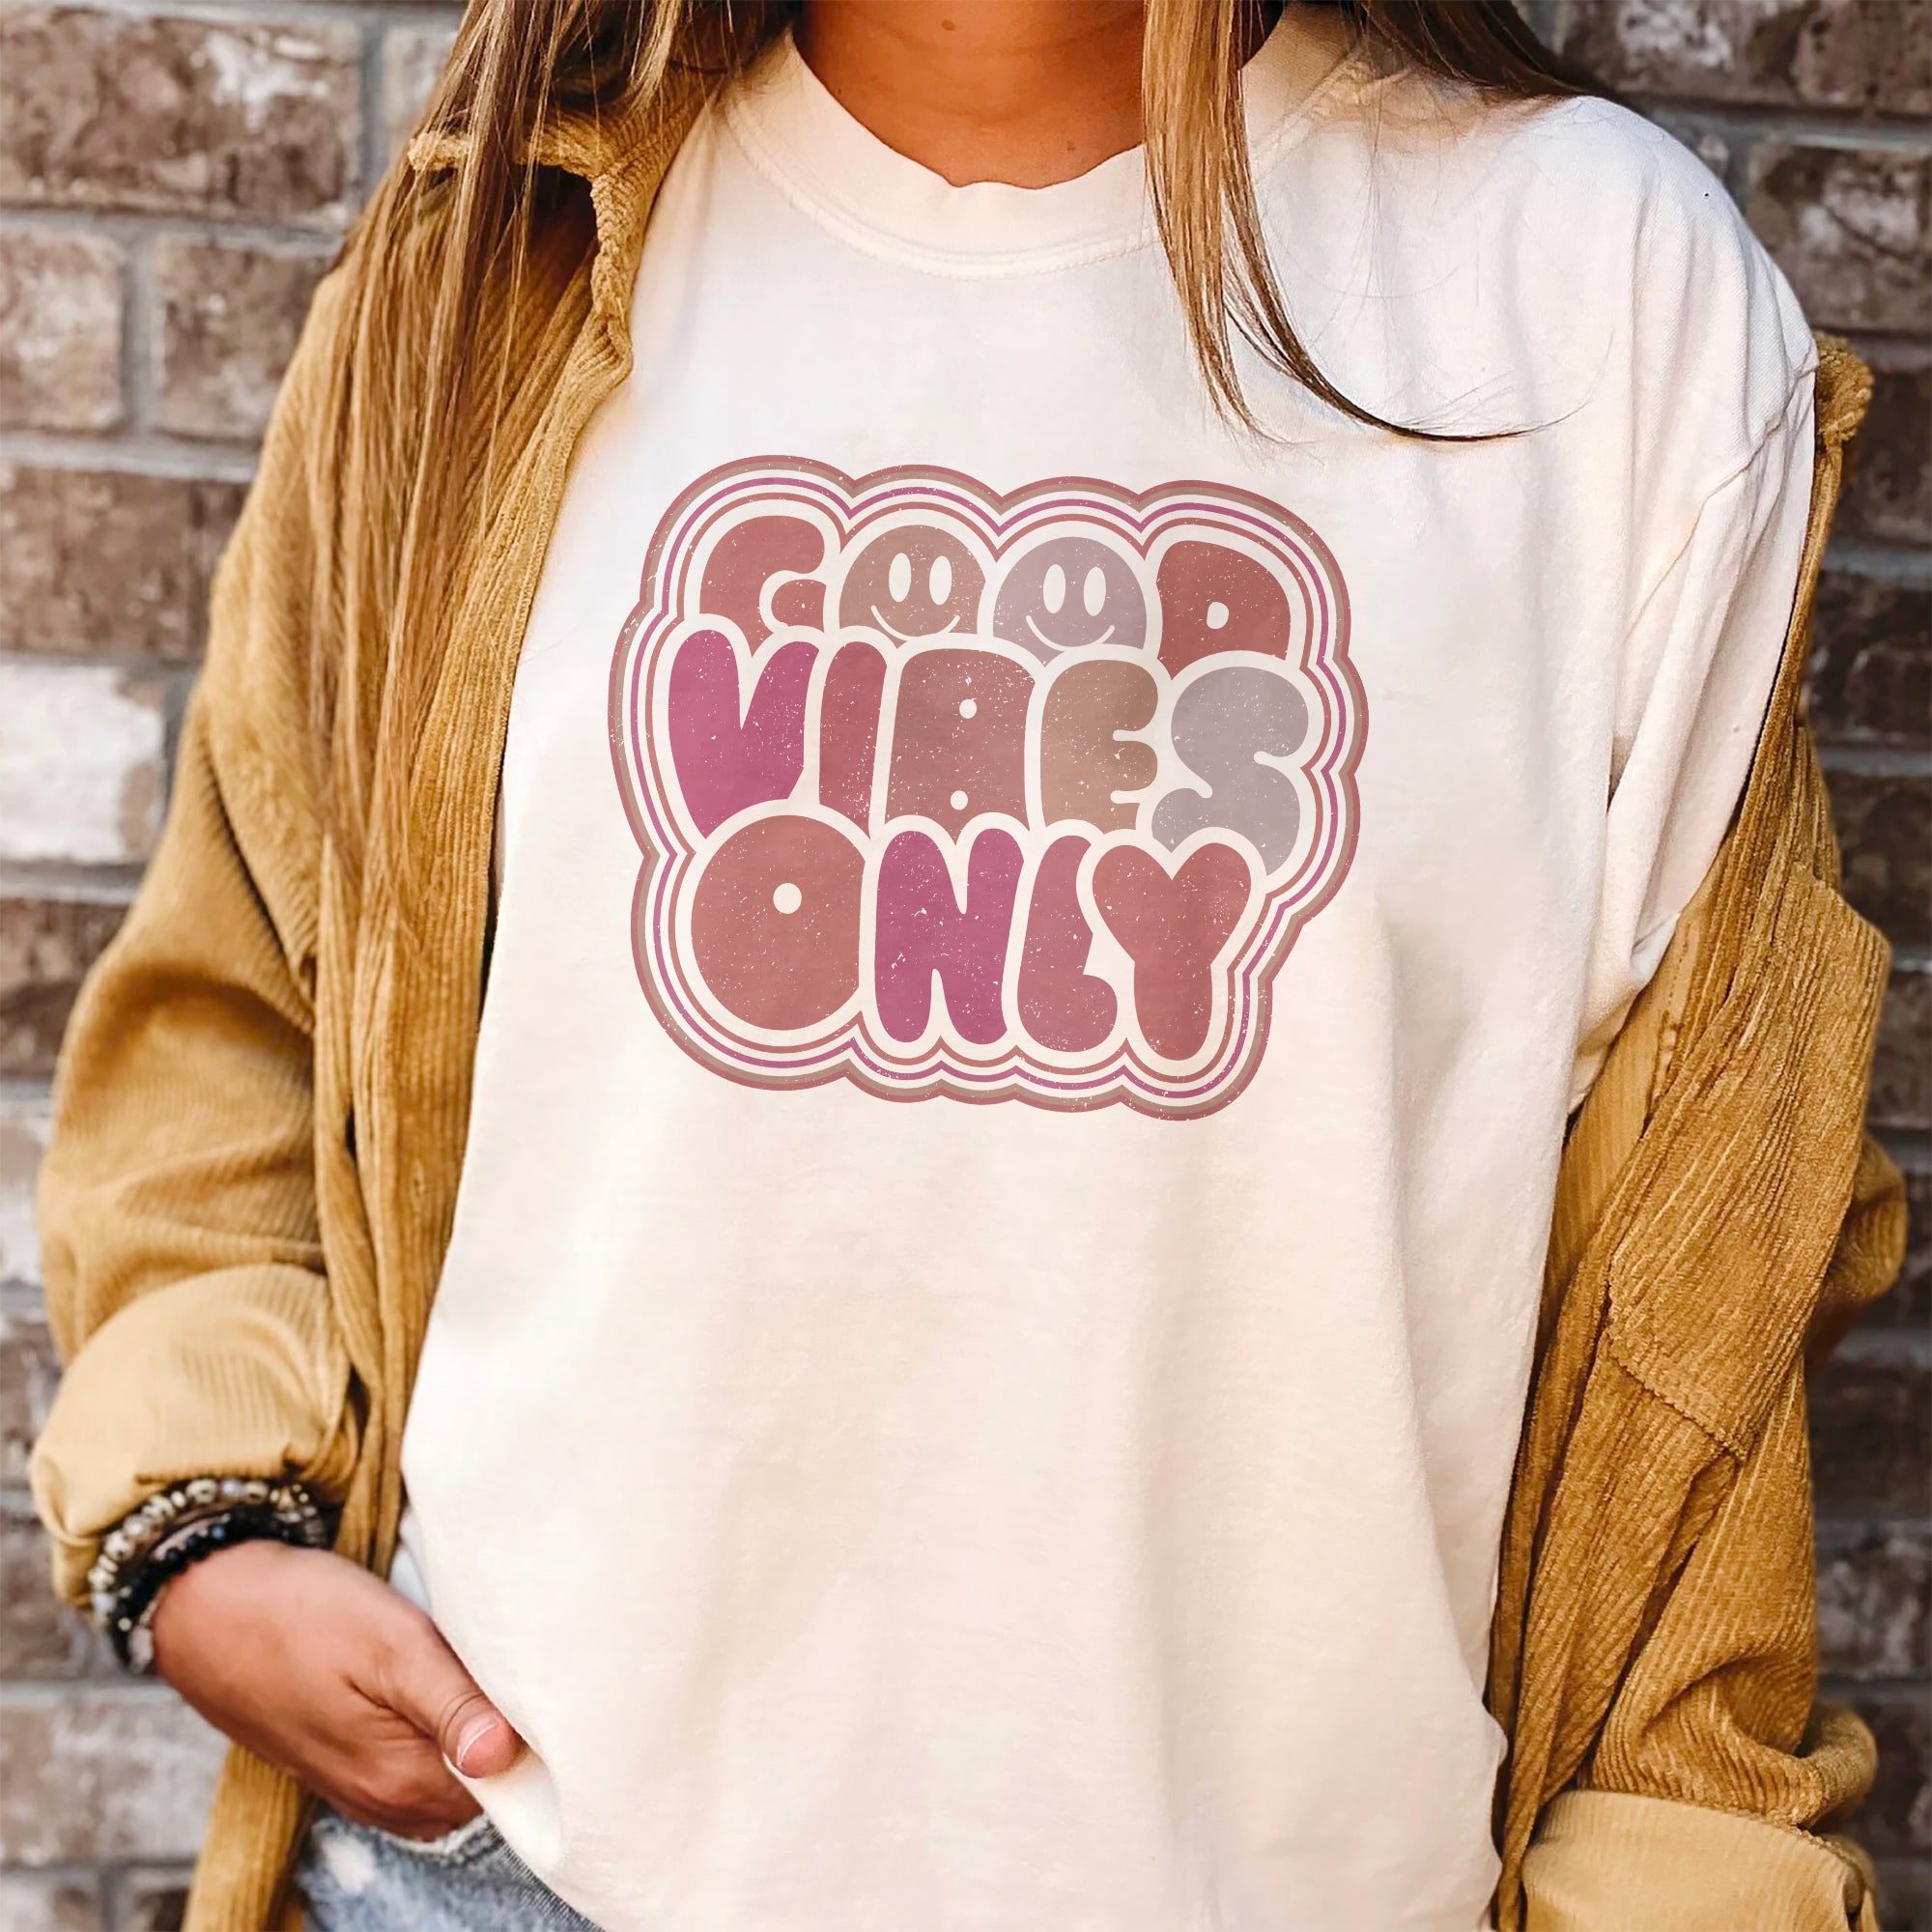 Good Vibes Only Oversized Shirt Garment-Dyed Graphic Tee